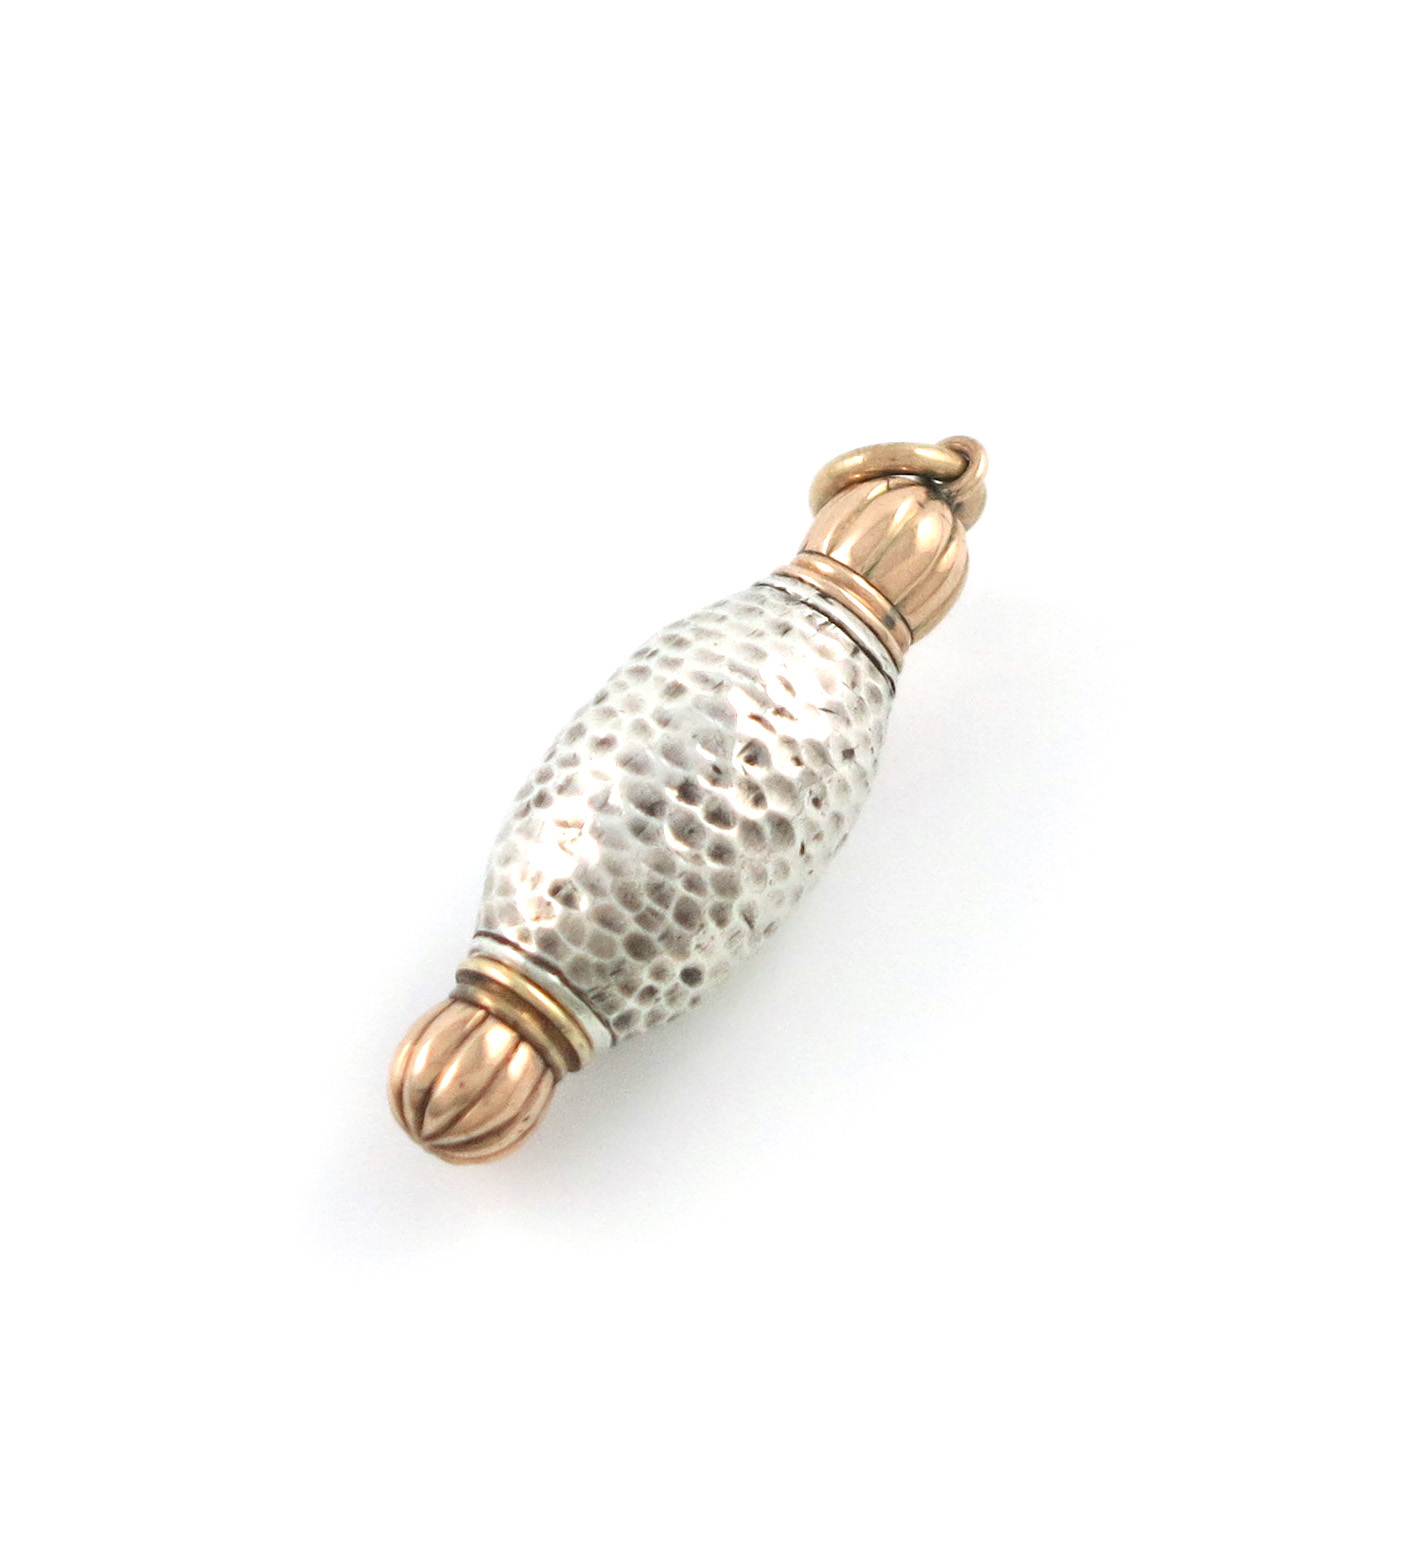 A Victorian novelty silver and gold pencil, unmarked, modelled as a barrel, fluted ends, with a ring